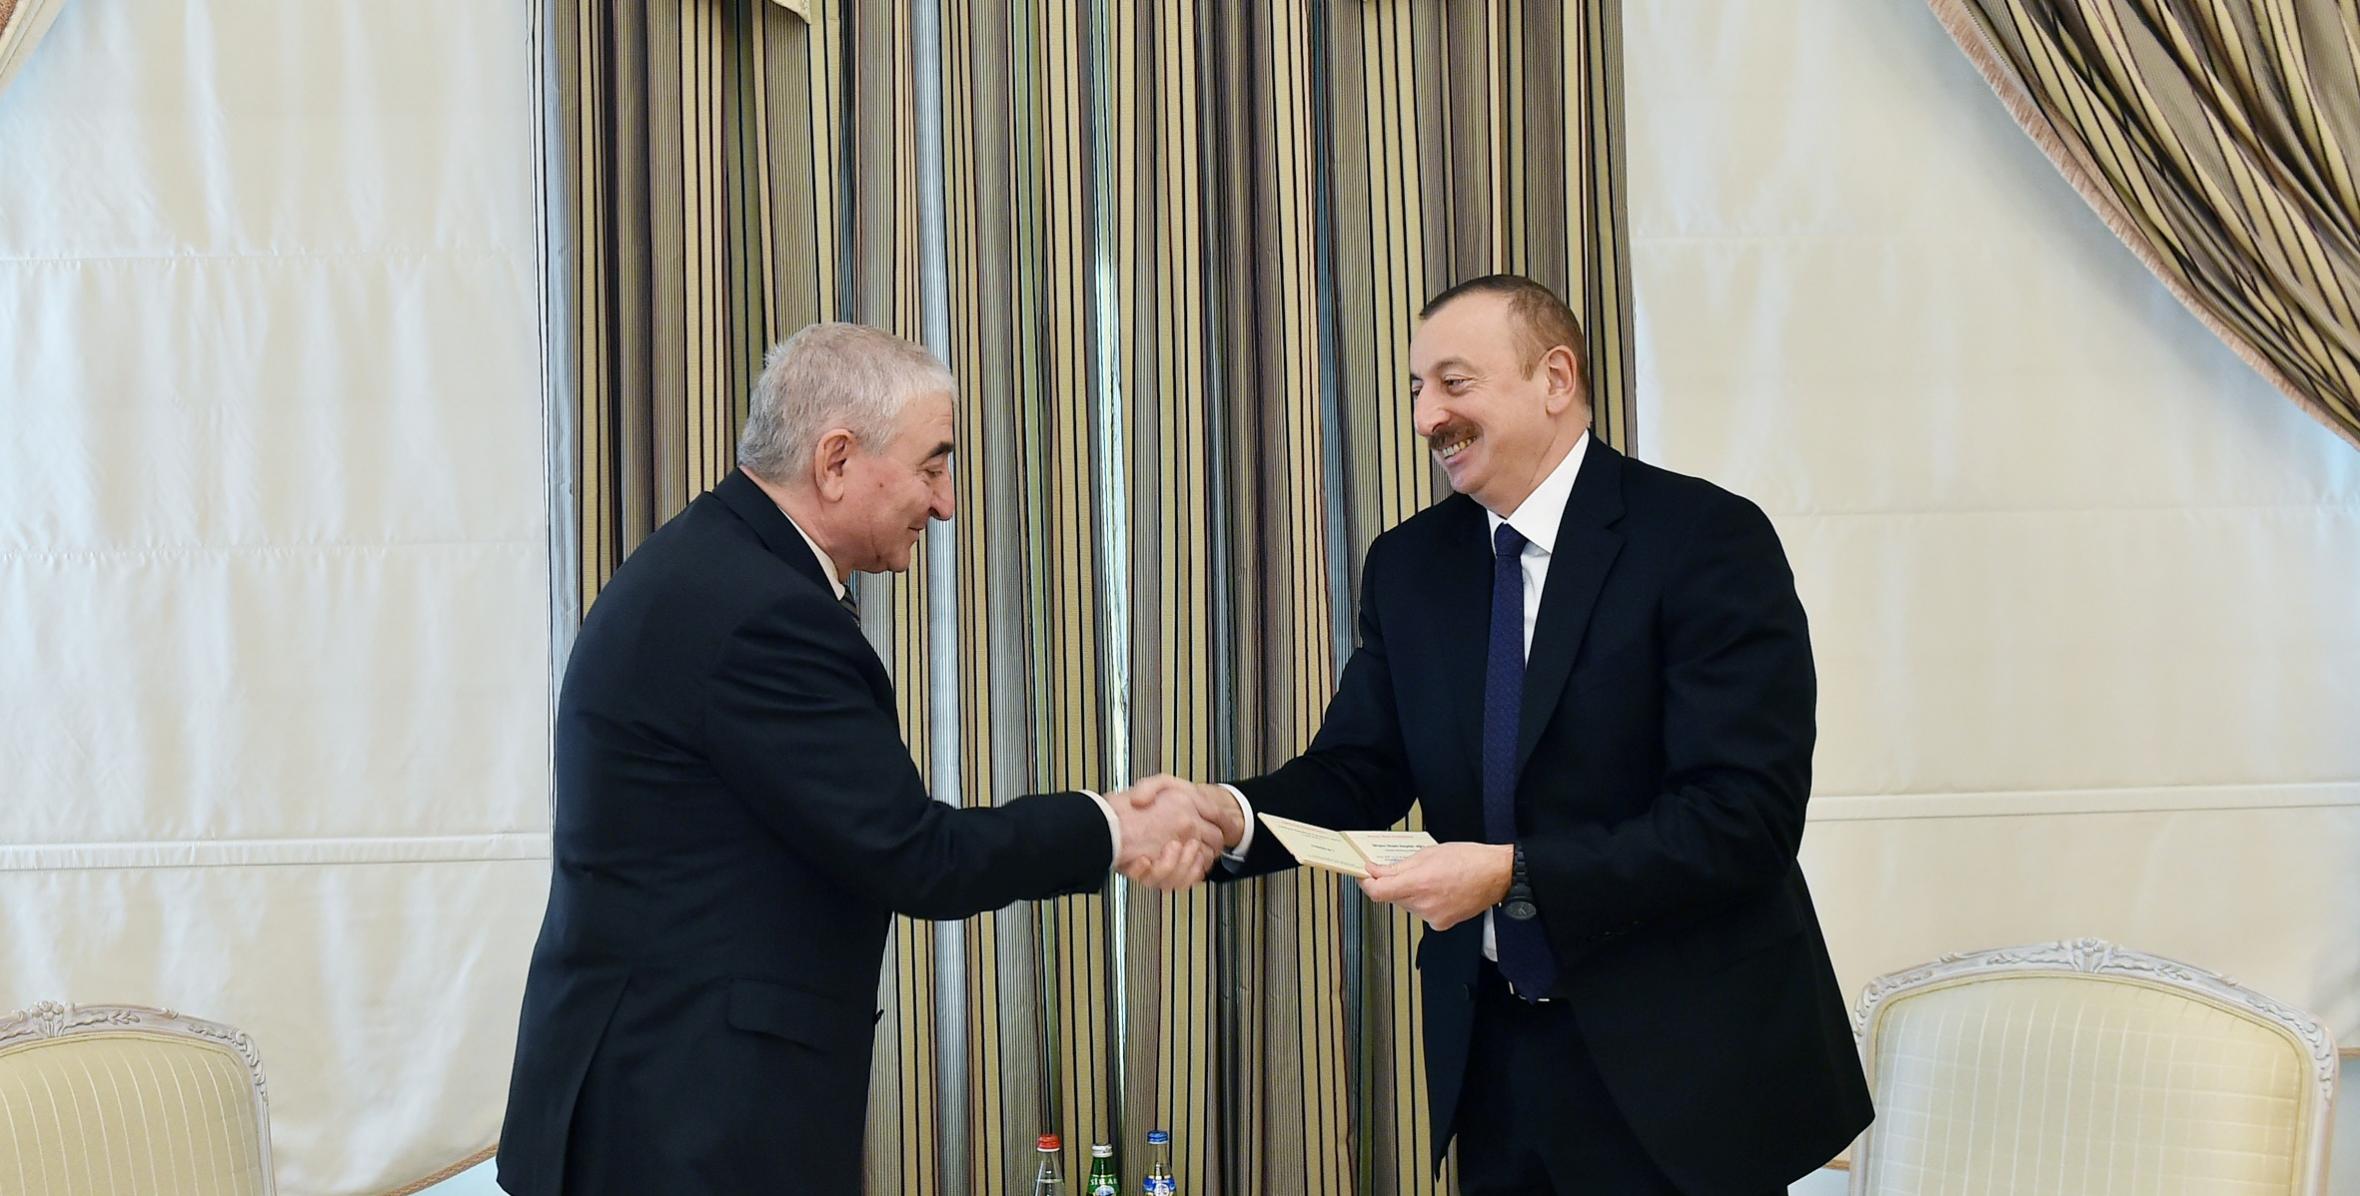 Chairman of Central Election Commission Mazahir Panahov presented presidential candidate certificate to Ilham Aliyev